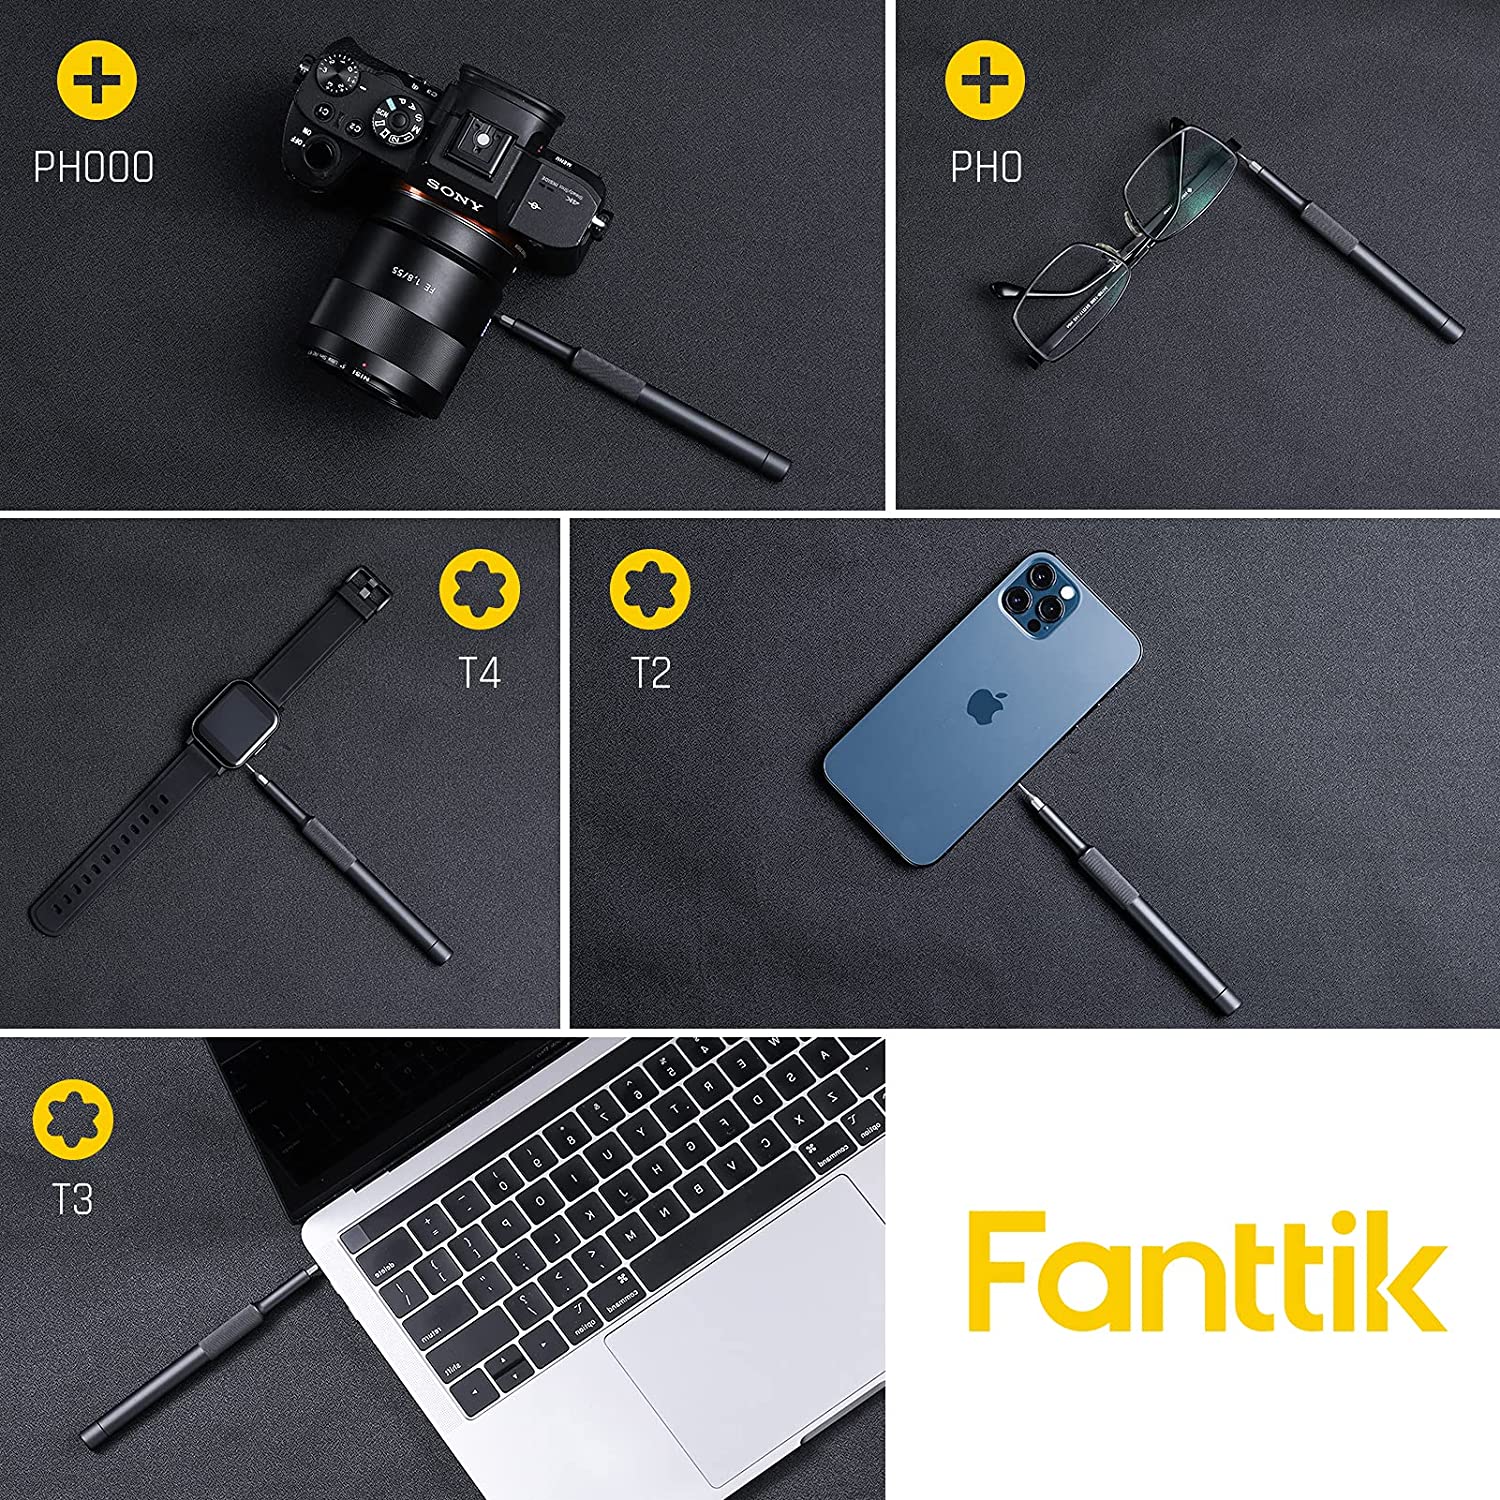 Fanttik X5 Precision Screwdriver Set, 24*S2 steel magnetic precision bit heads, a total of 10 mainstream types to meet your different daily use, such as quartz watch, cameras, radios, tablet computers, mobile phones, drones, etc.